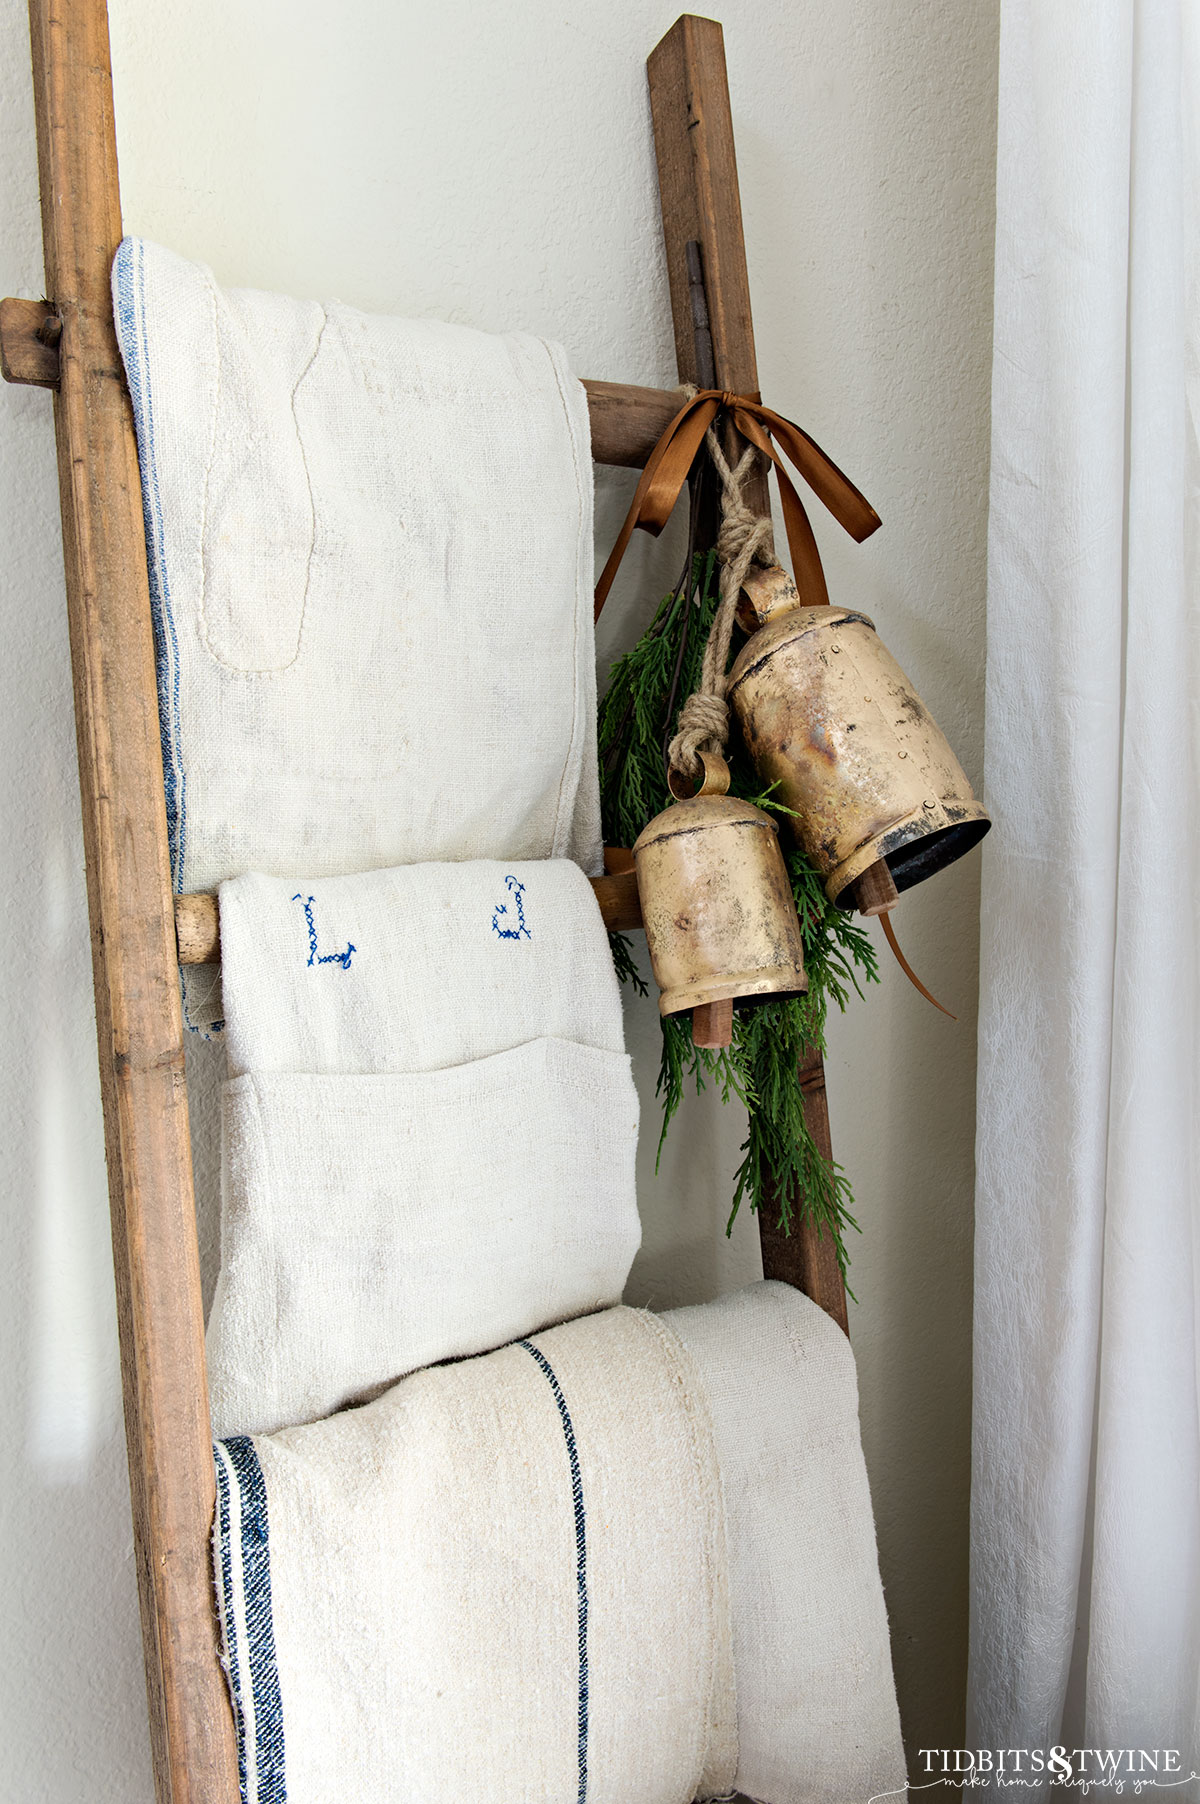 decorative wooden ladder in corner with antique grain sacks on rungs and rustic brass bells with greenery hanging from it